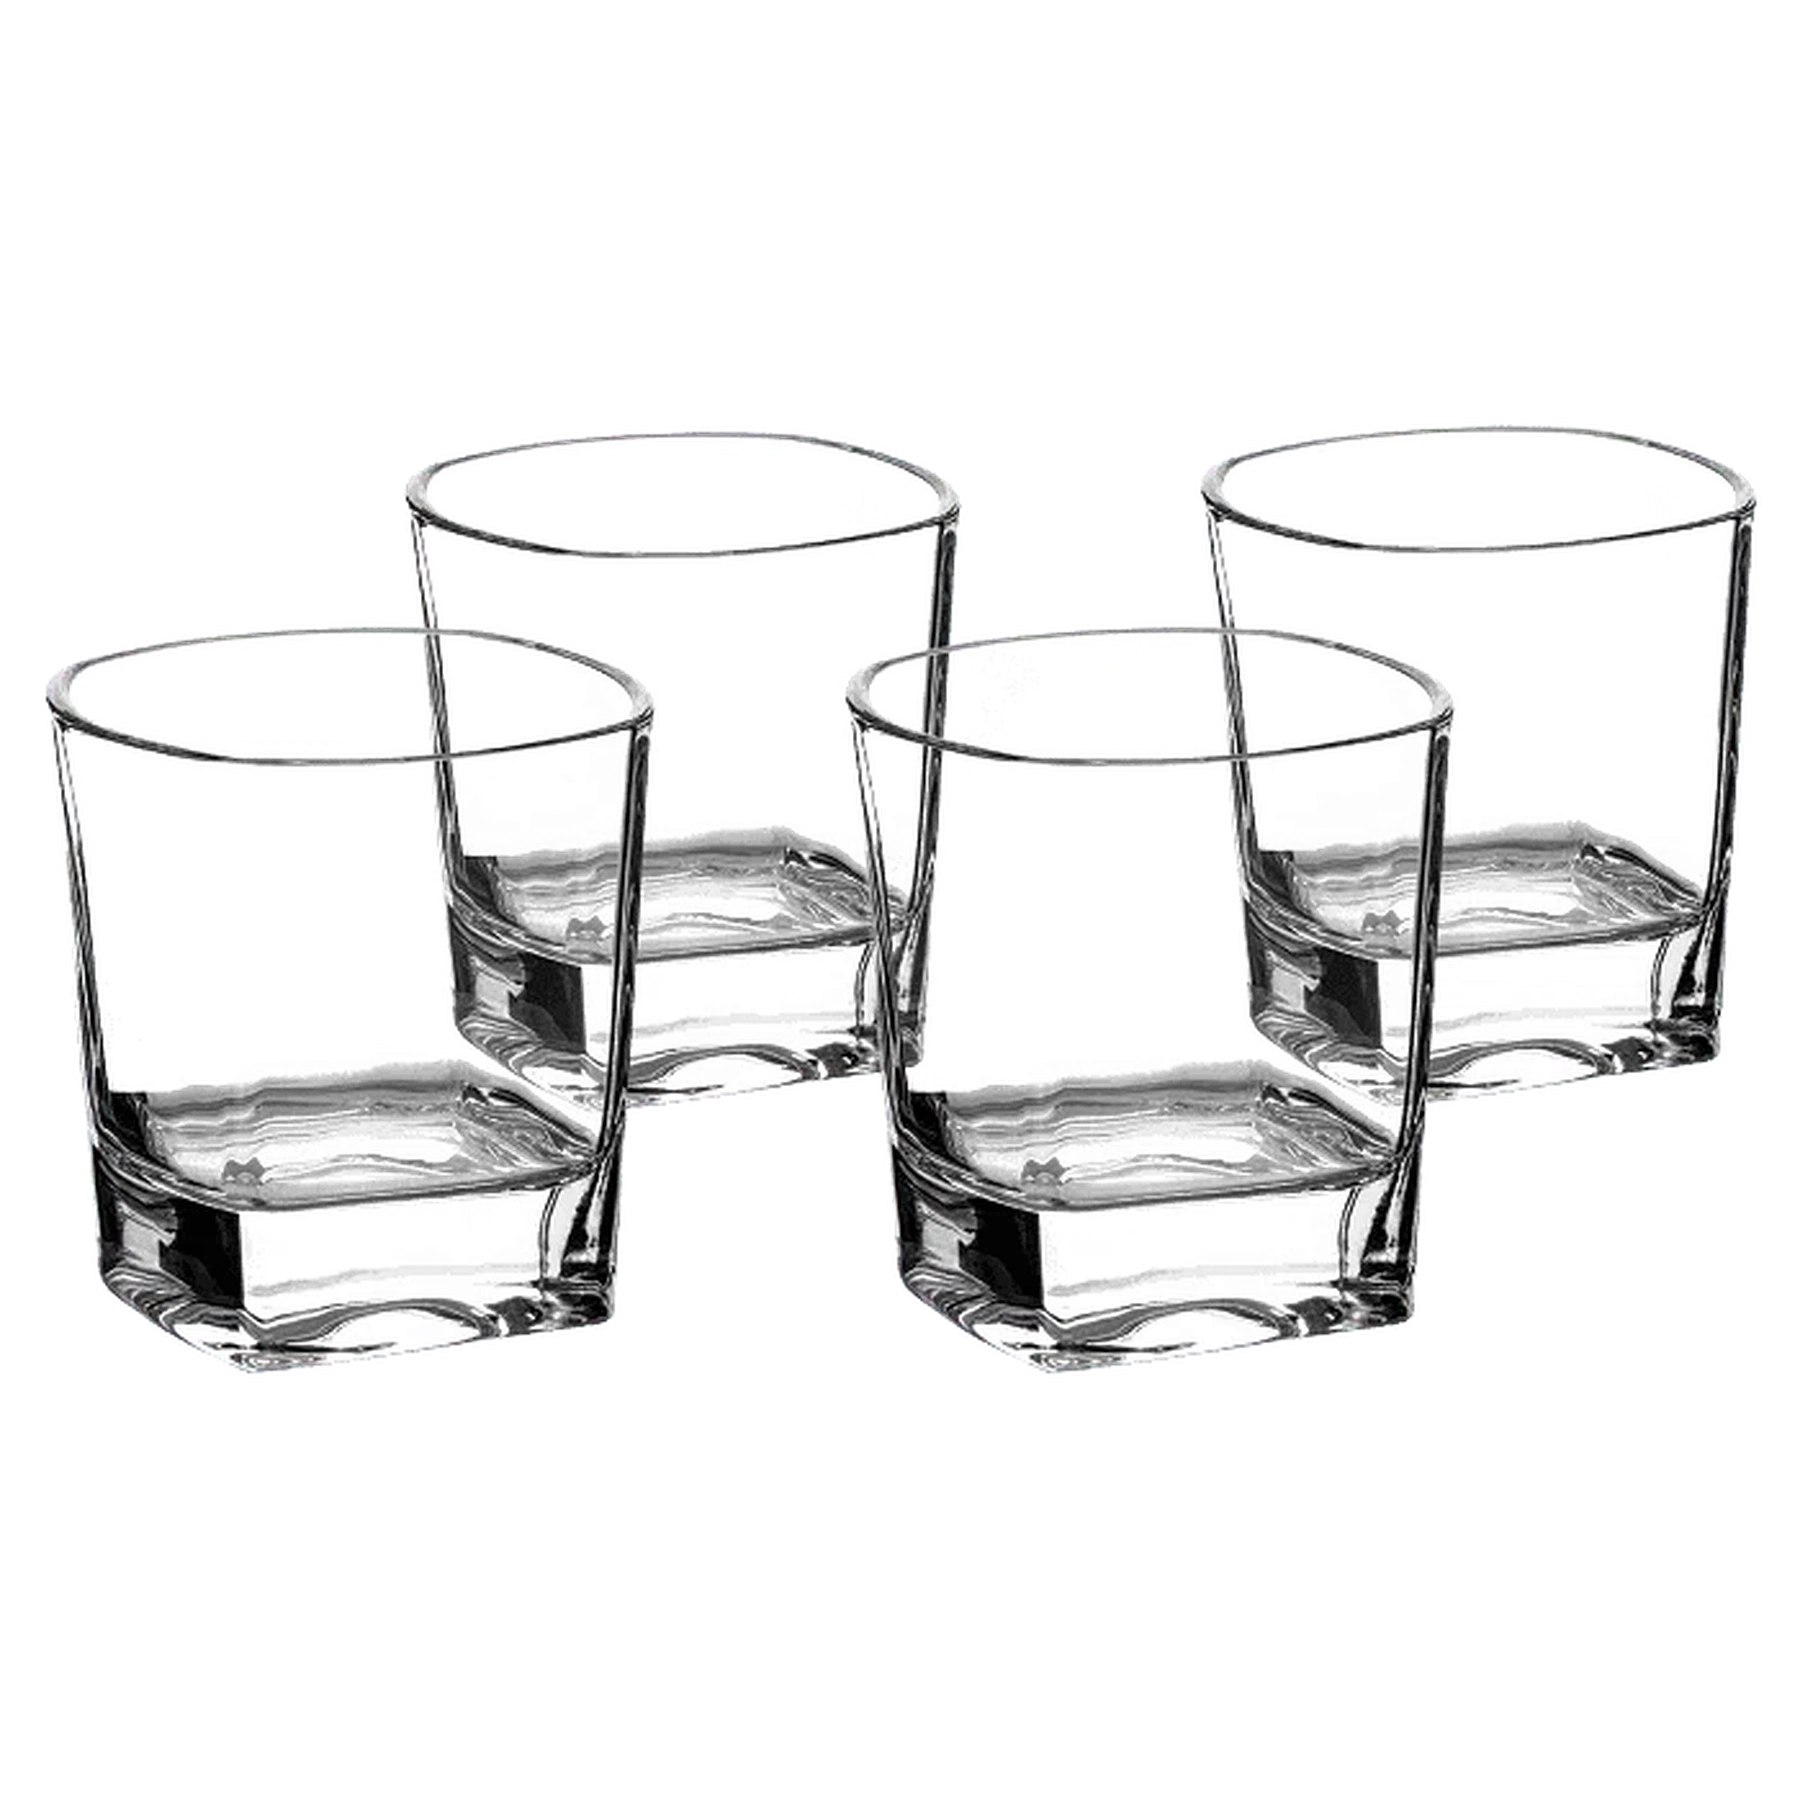 Set of Four 8 oz. Square Rocks Glasses in a Gift Box